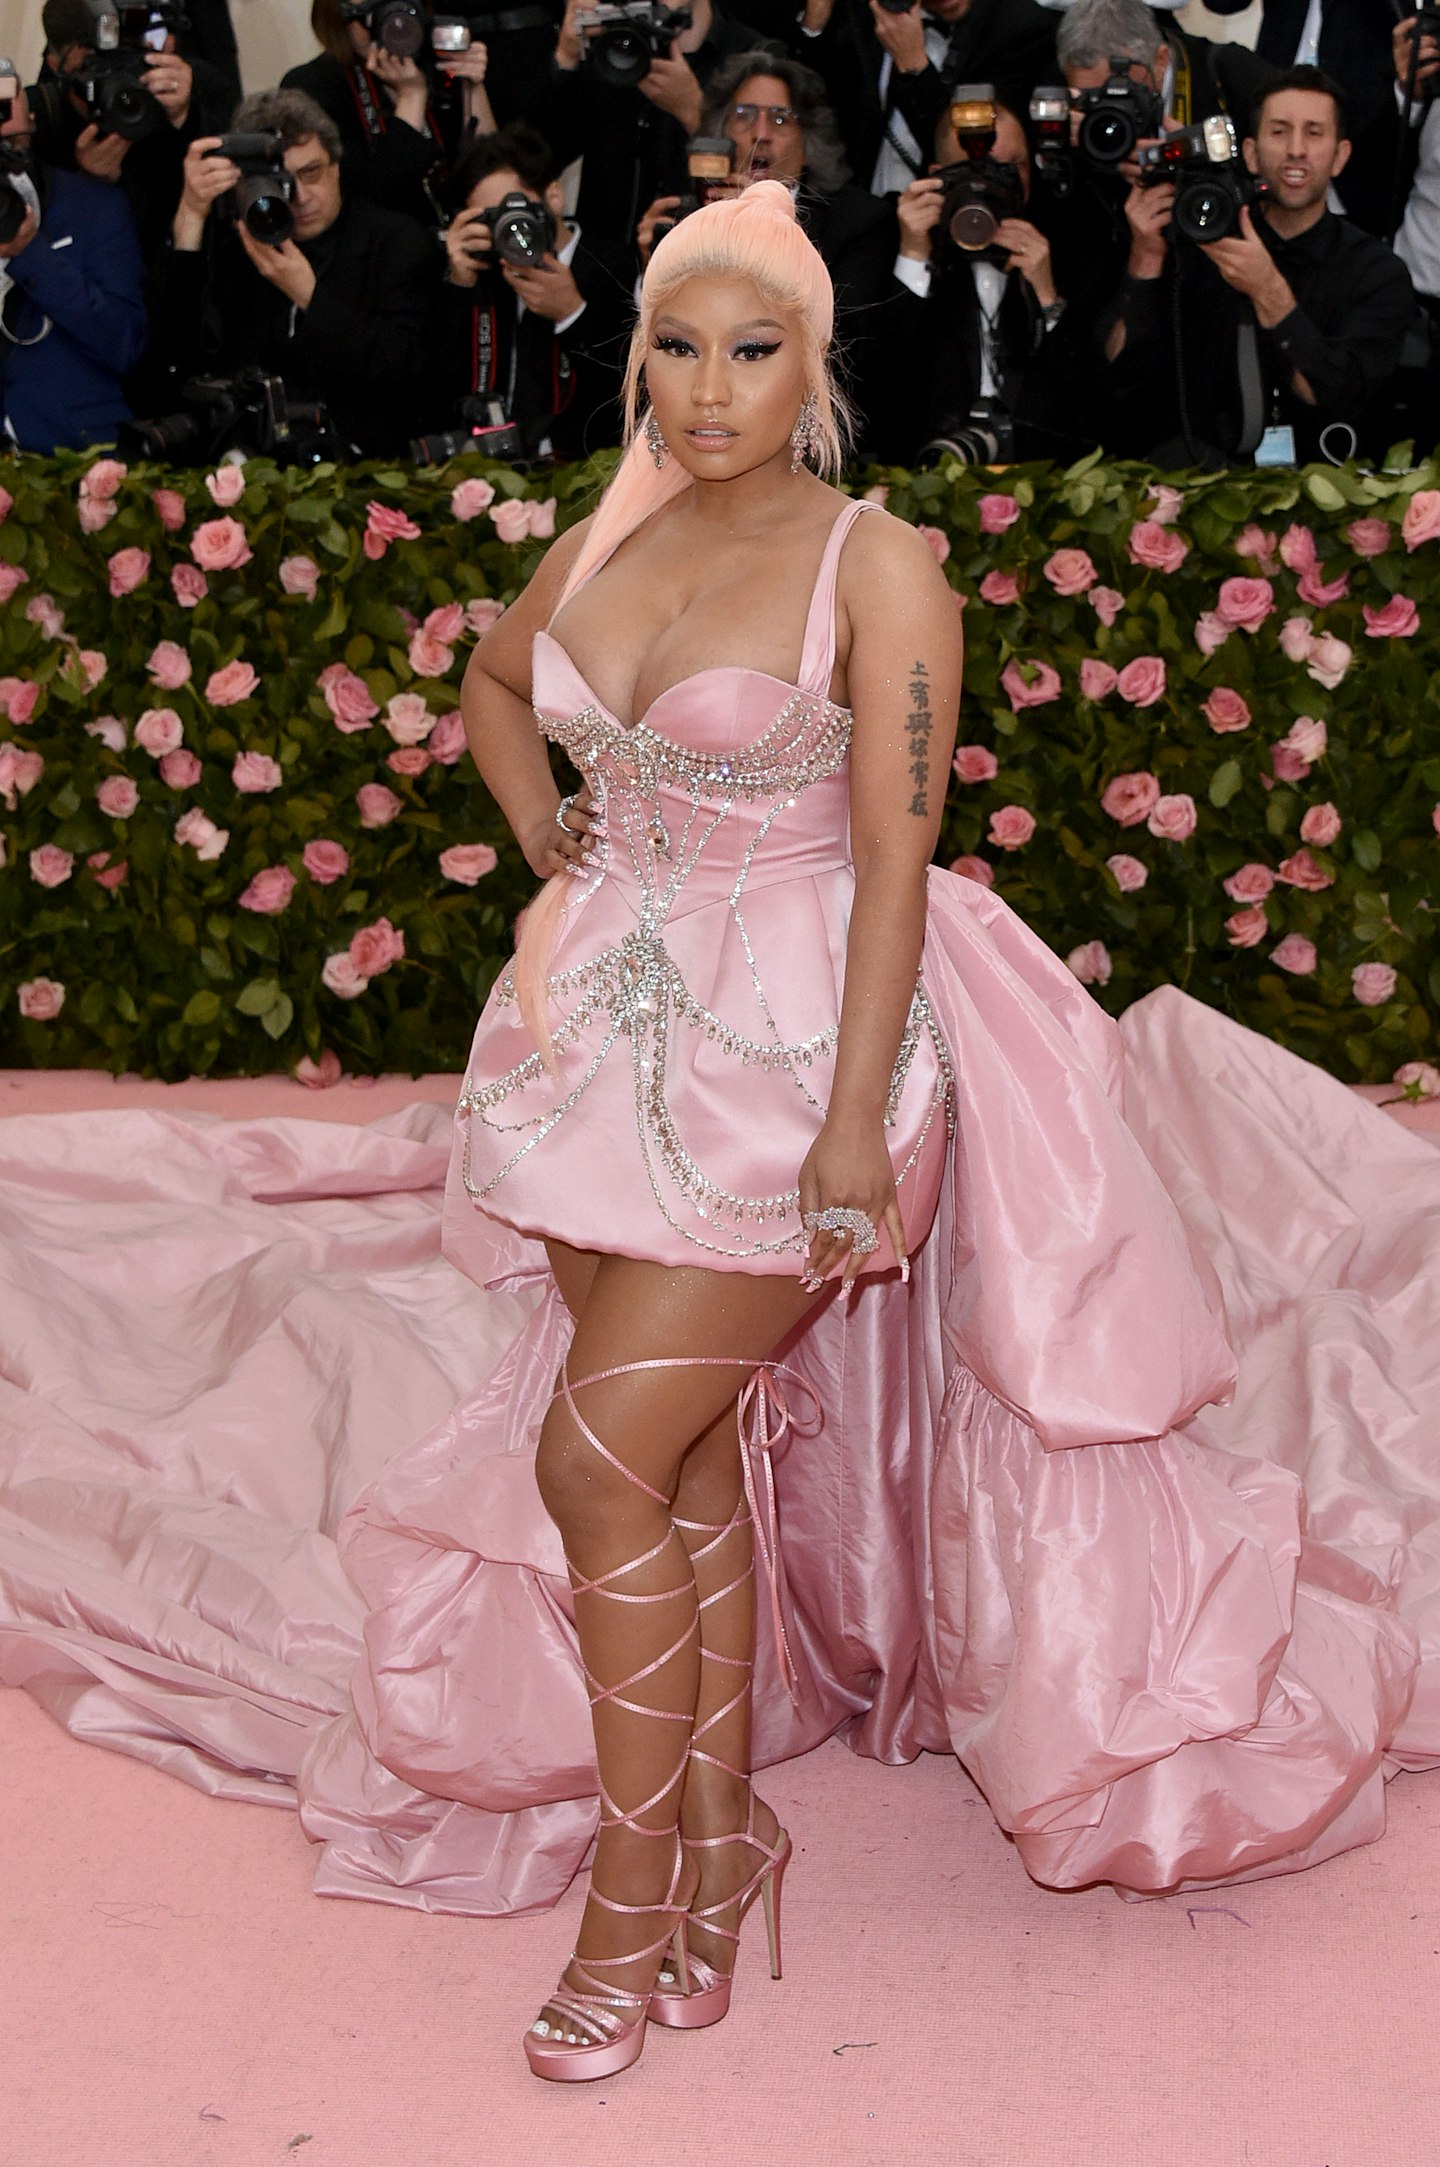 Nicky Minaj wore a pale pink gown with a dramatic train